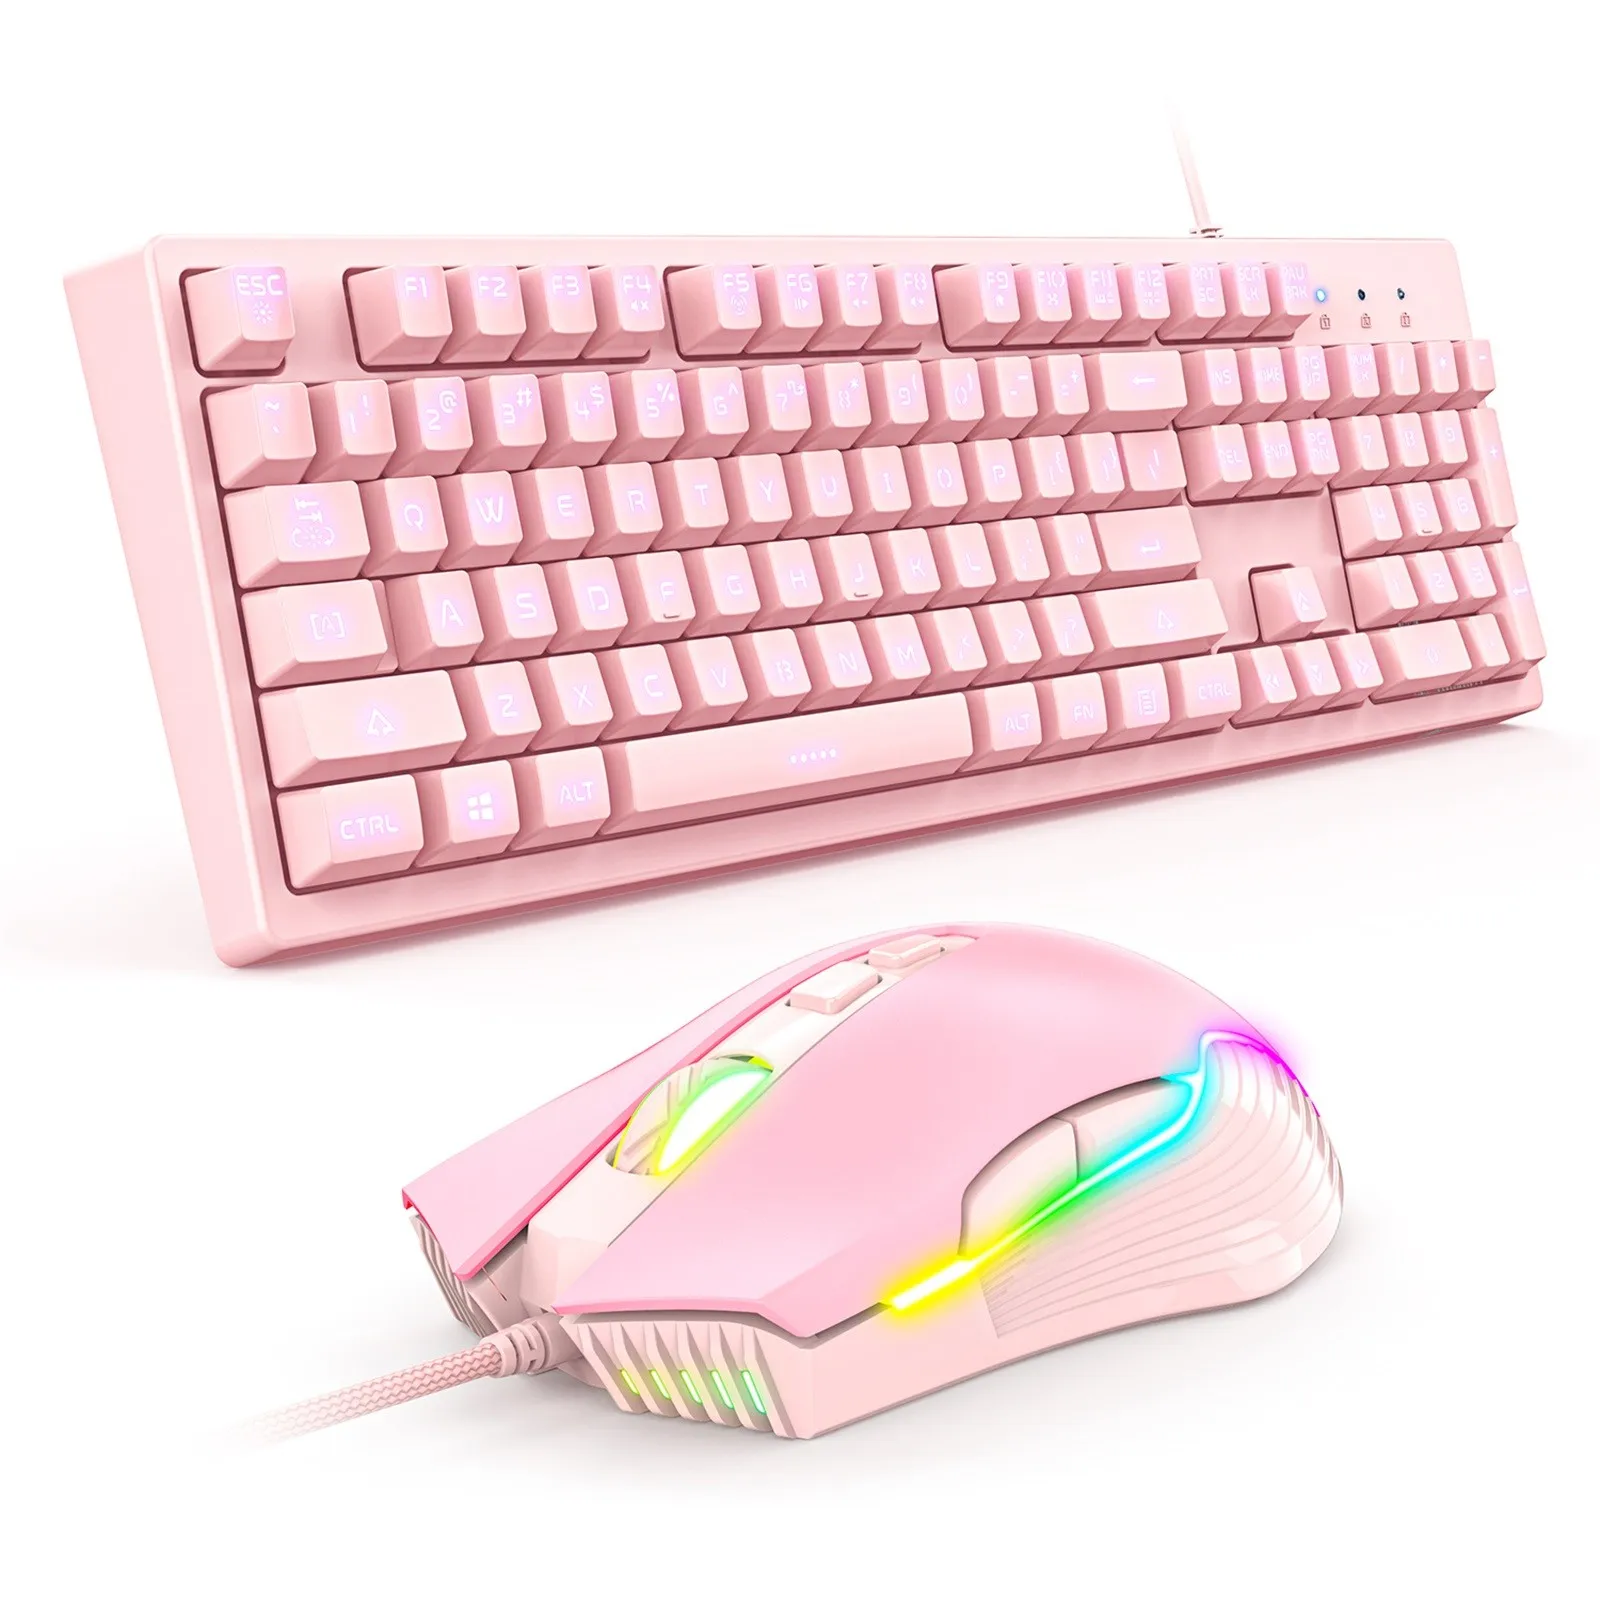 

G25+CW905 Pink Wired Keyboard And Mouse Set Colorful LED Backlit 6400 DPI Gaming Keyboards With RGB Mice For Office Dropshipping